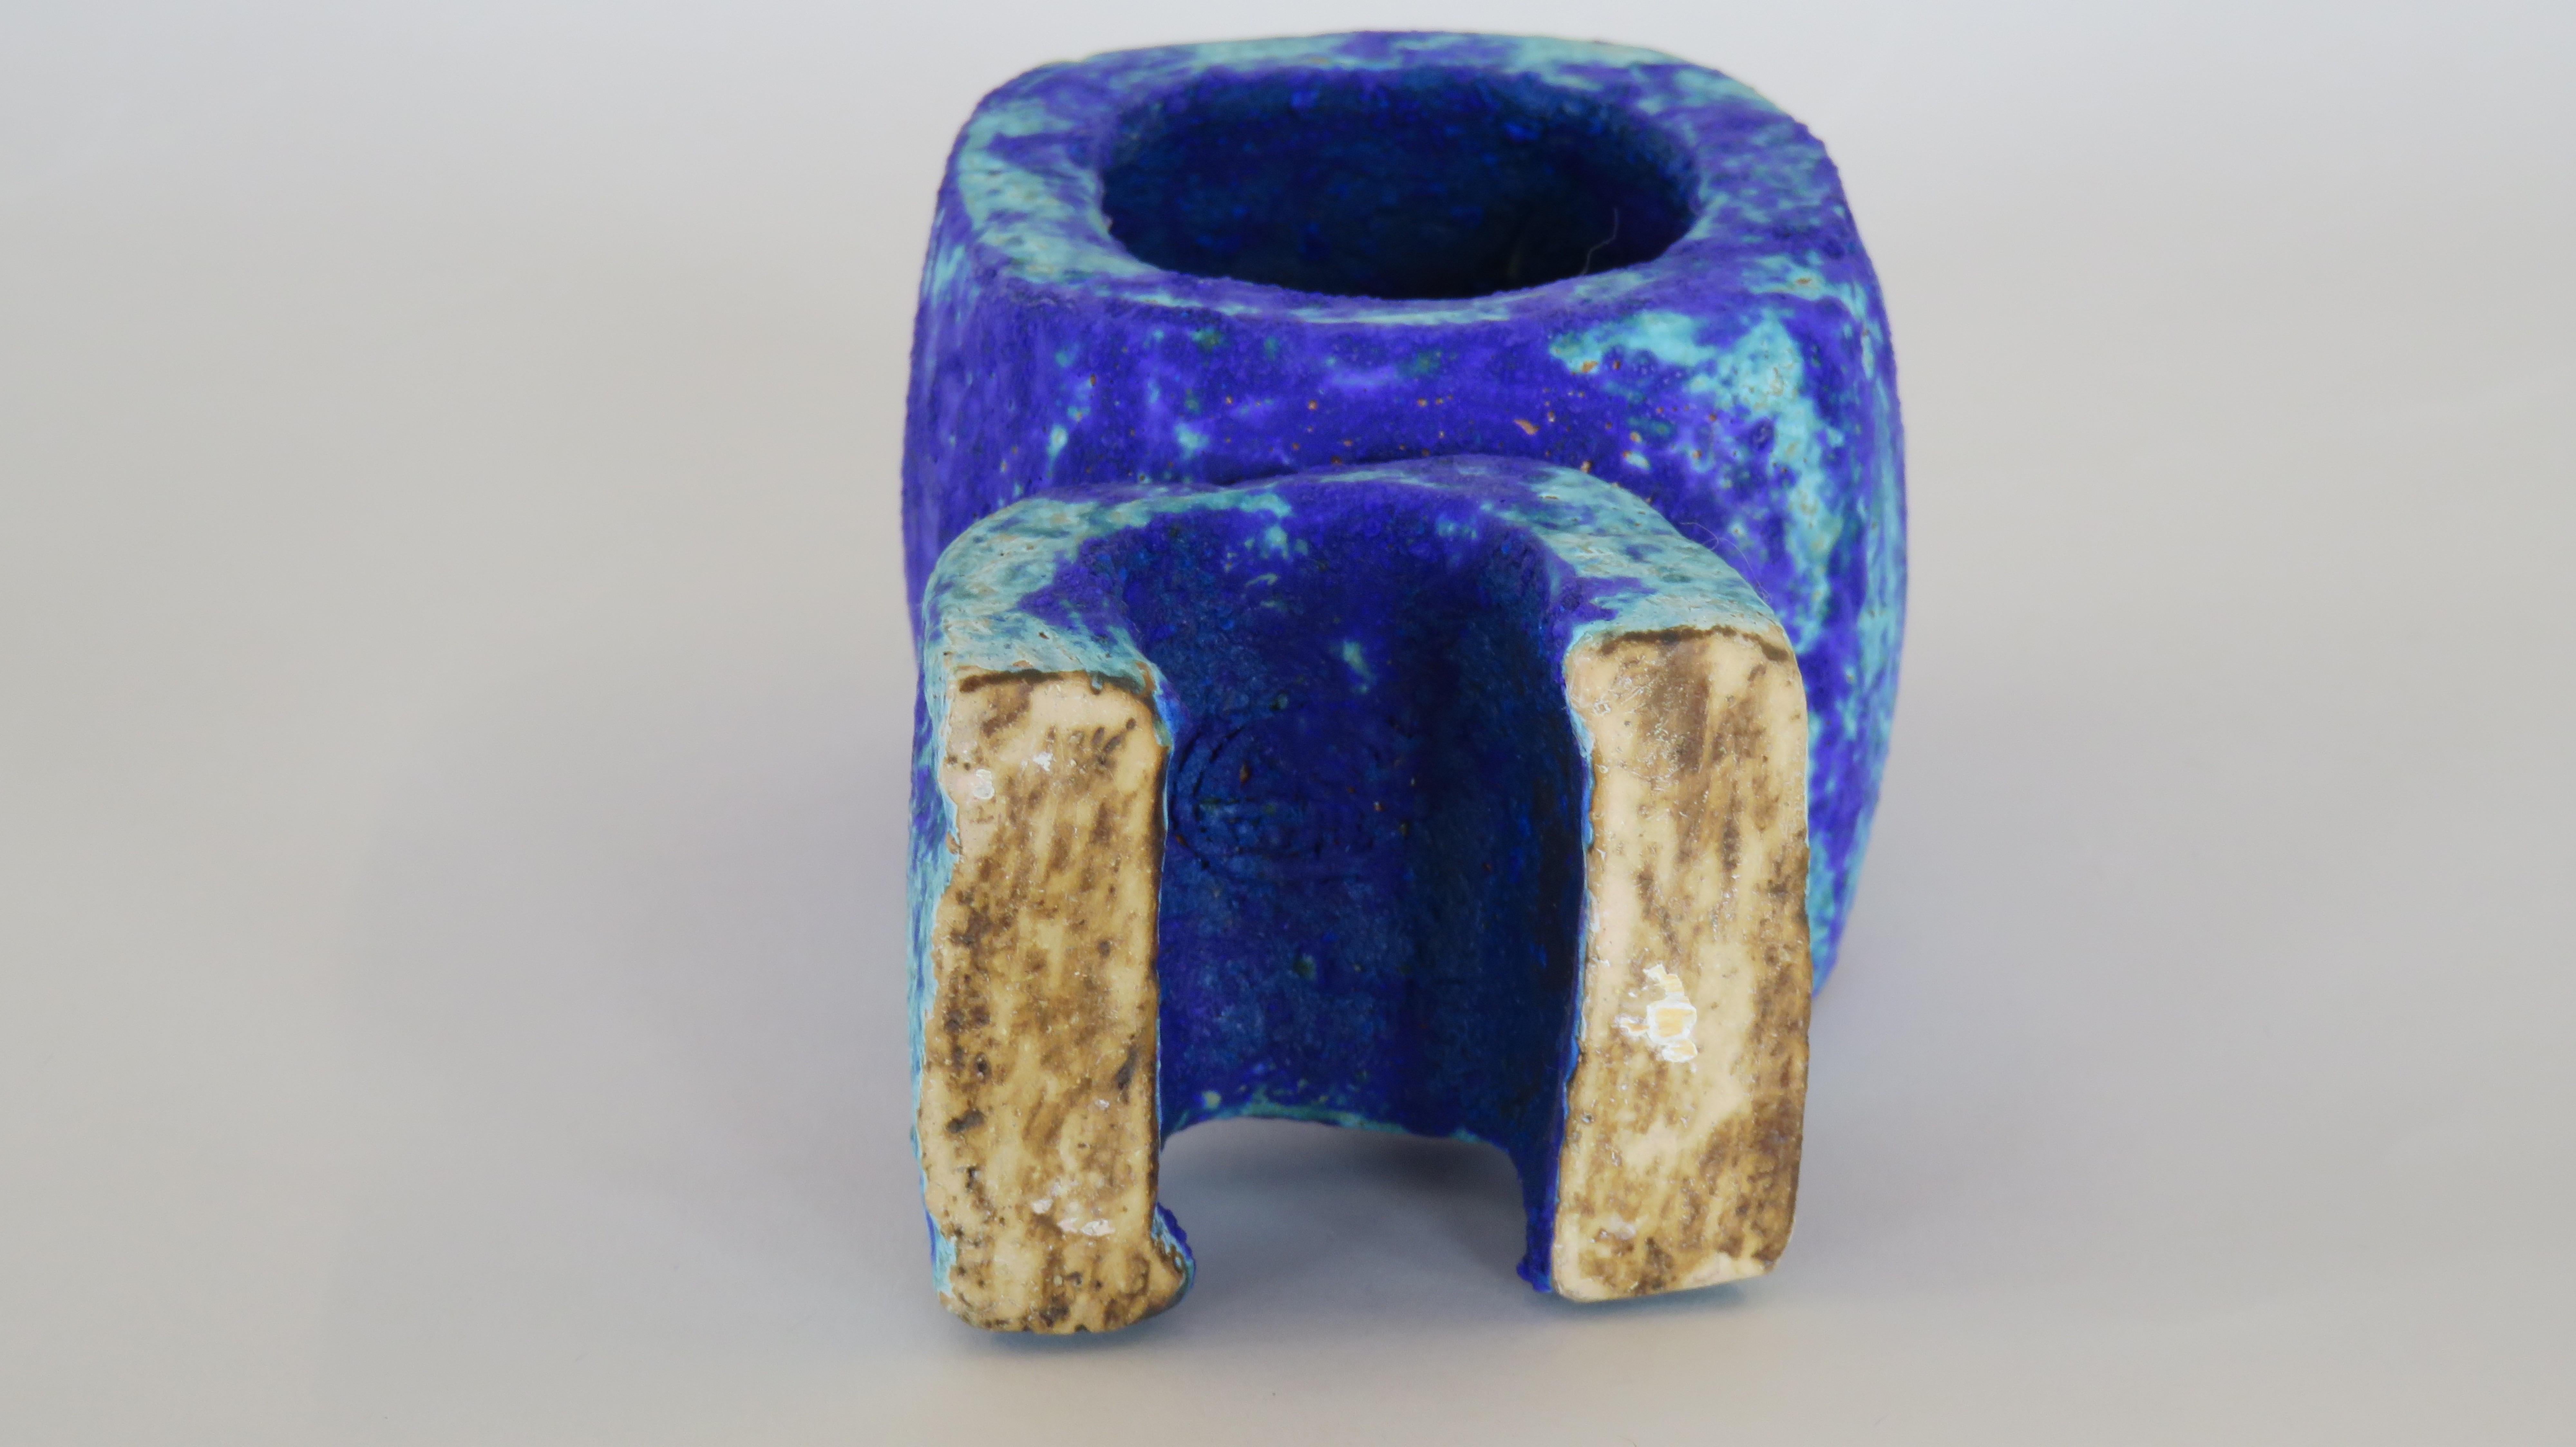 Handbuilt Standing Oval Ceramic Sculpture in Turquoise and Deep Blue #1 1